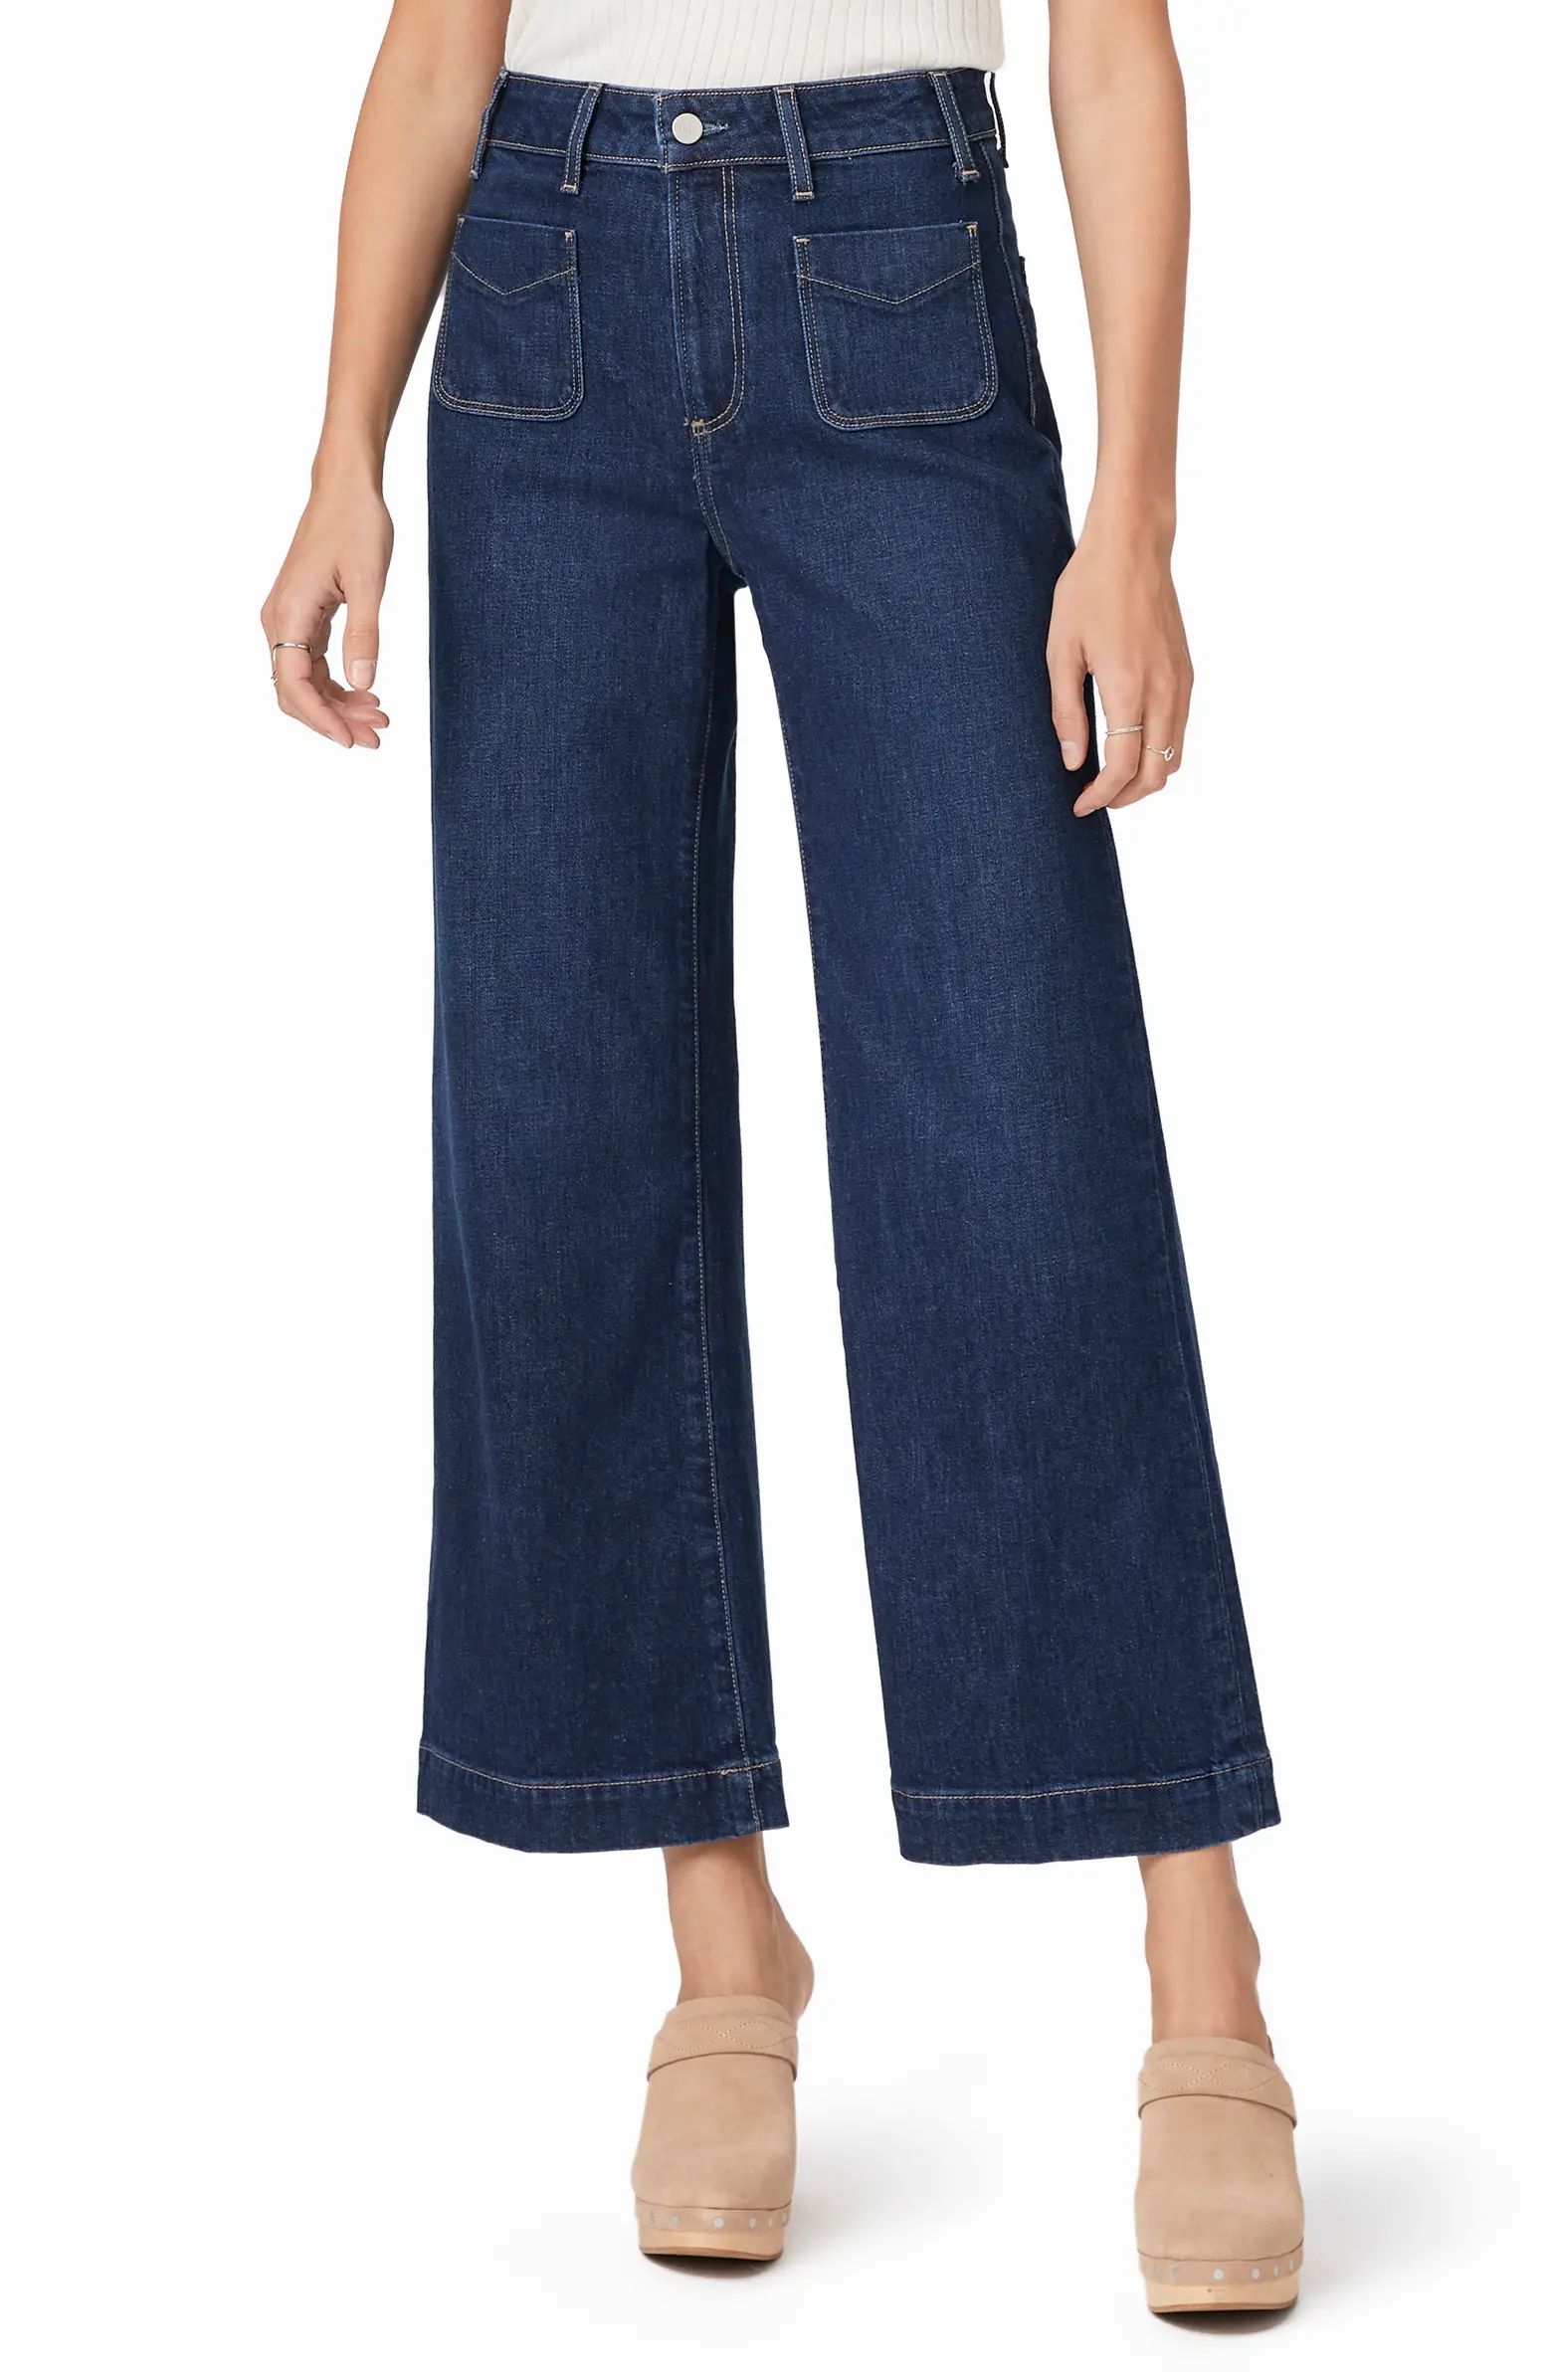 Anessa Patch Pocket High Waist Ankle Wide Leg Jeans | Nordstrom